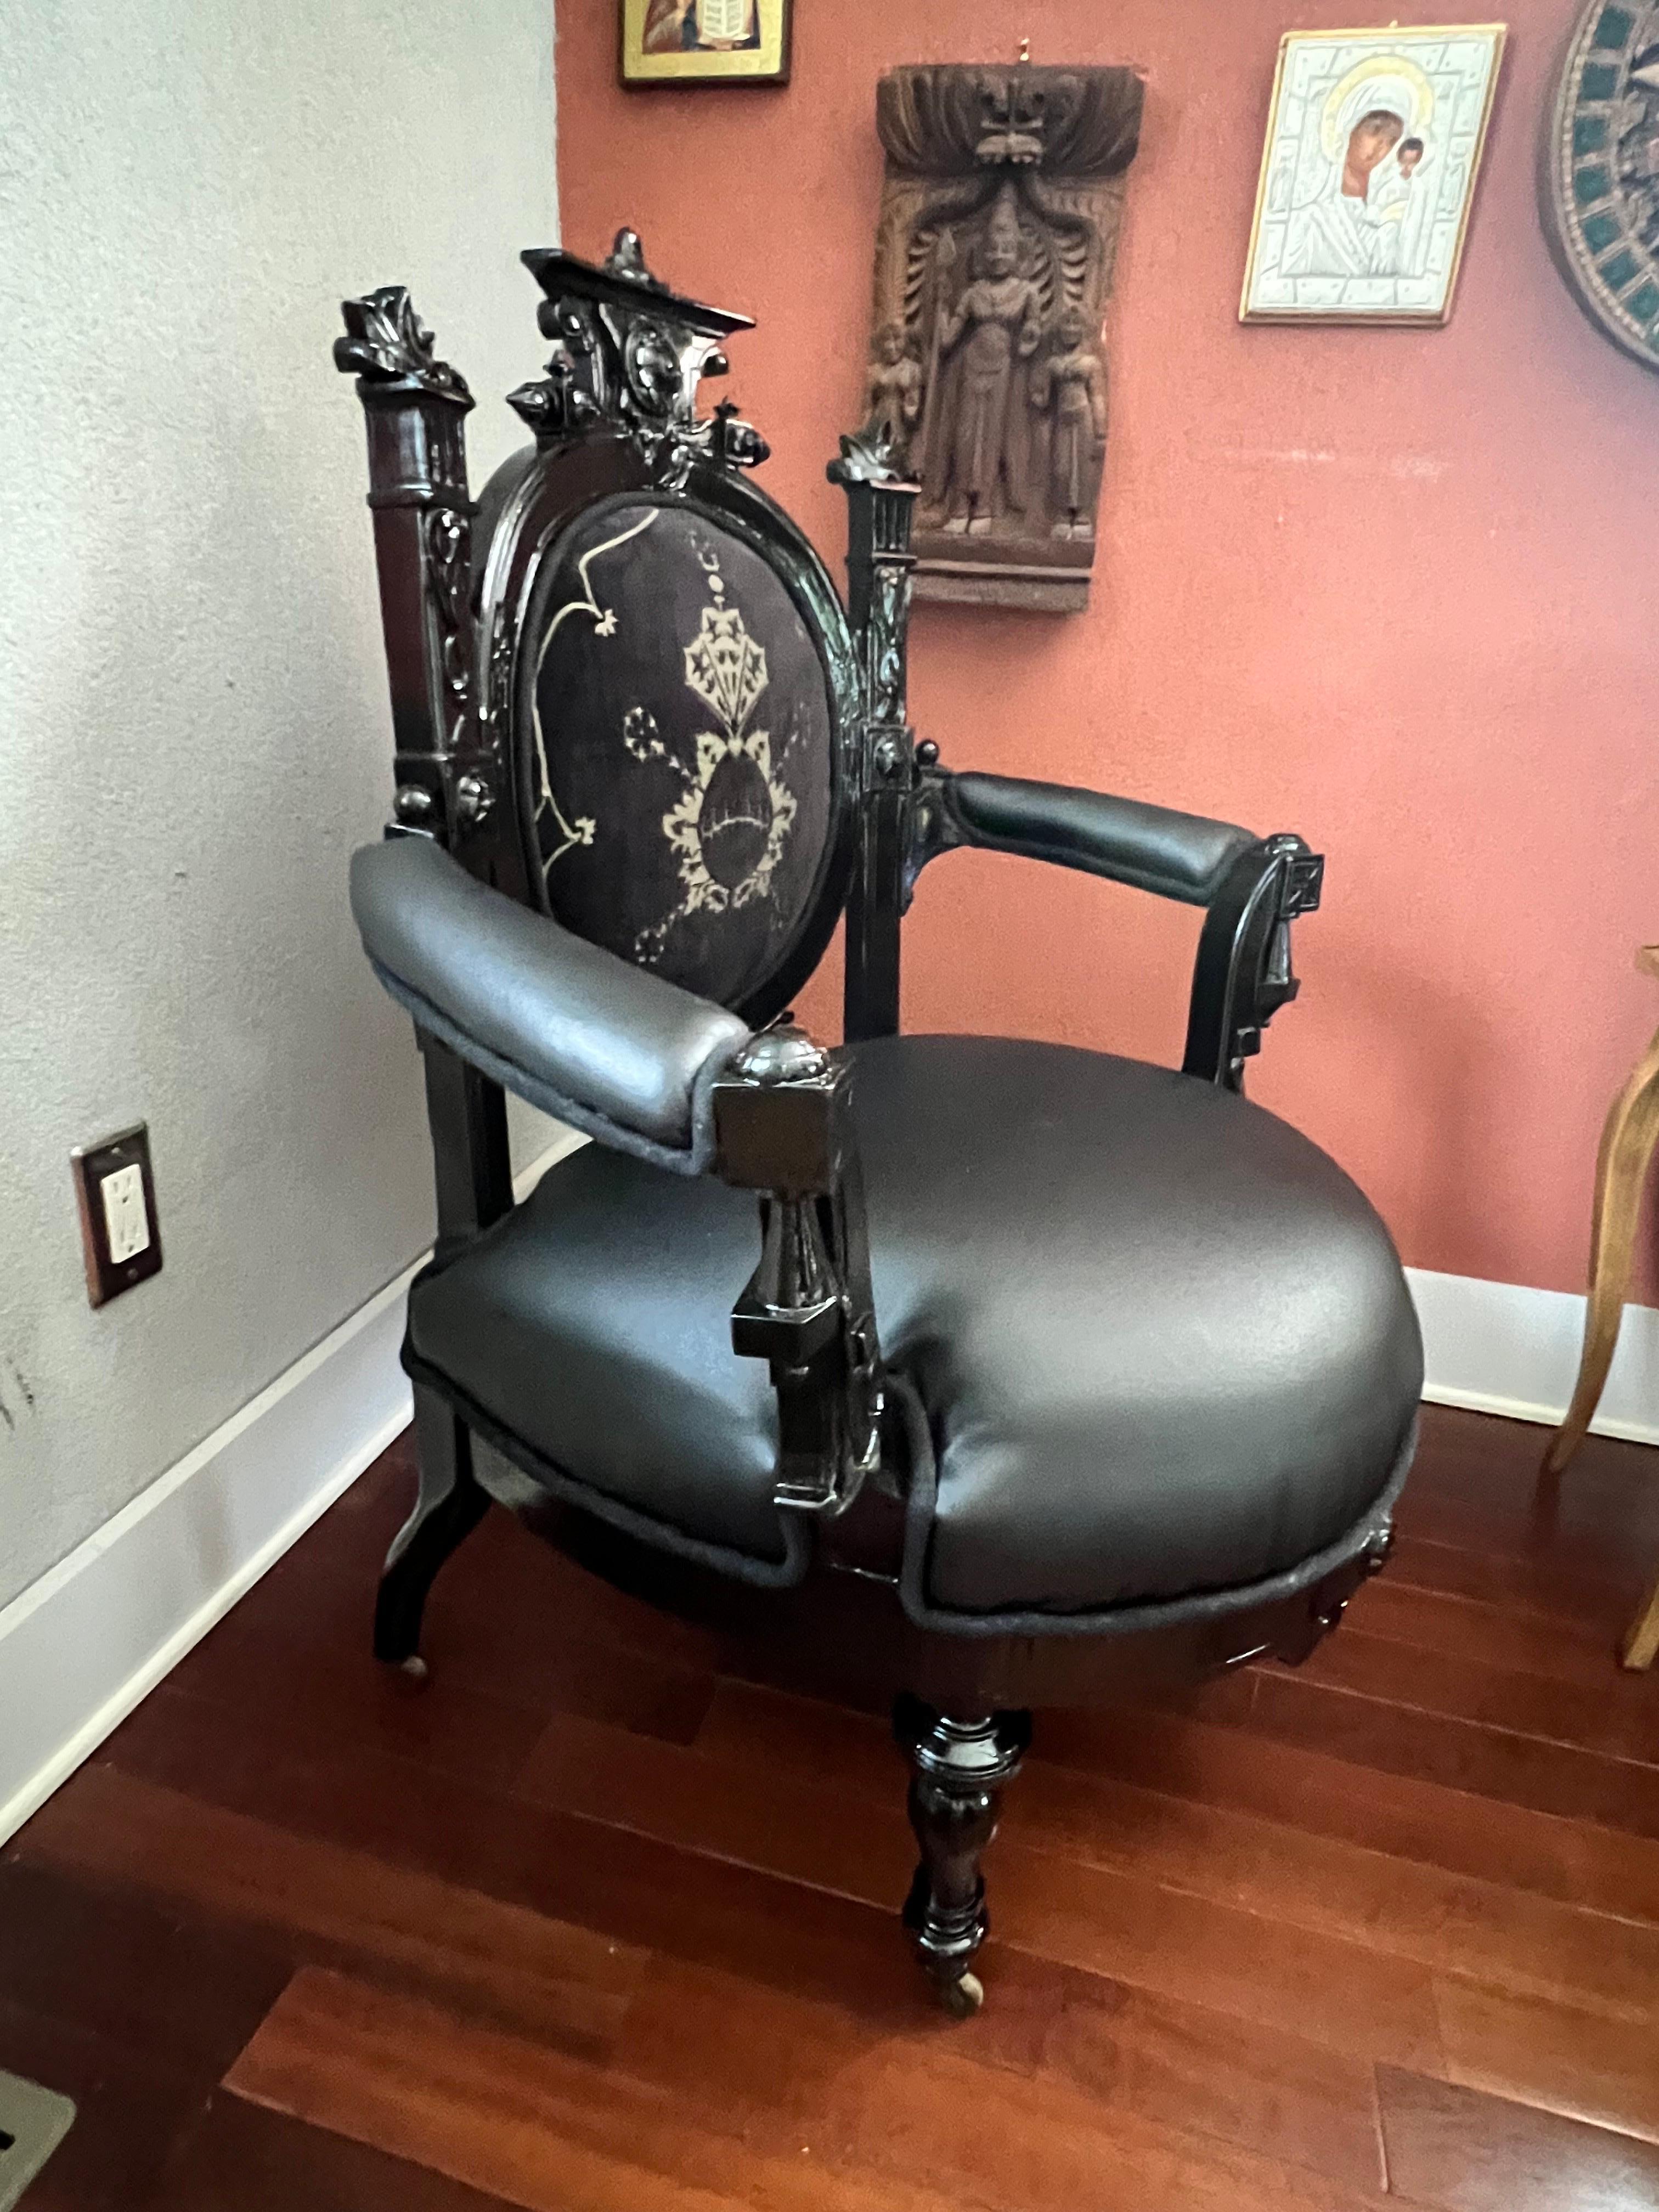 Stunning Antique Chair that has been fully restored. Black Leather seat and velvet back  gives this oversized chair a throne style that’s is so unique
if you are looking to add a one of kind chair as   focal point to any room this chair is perfect